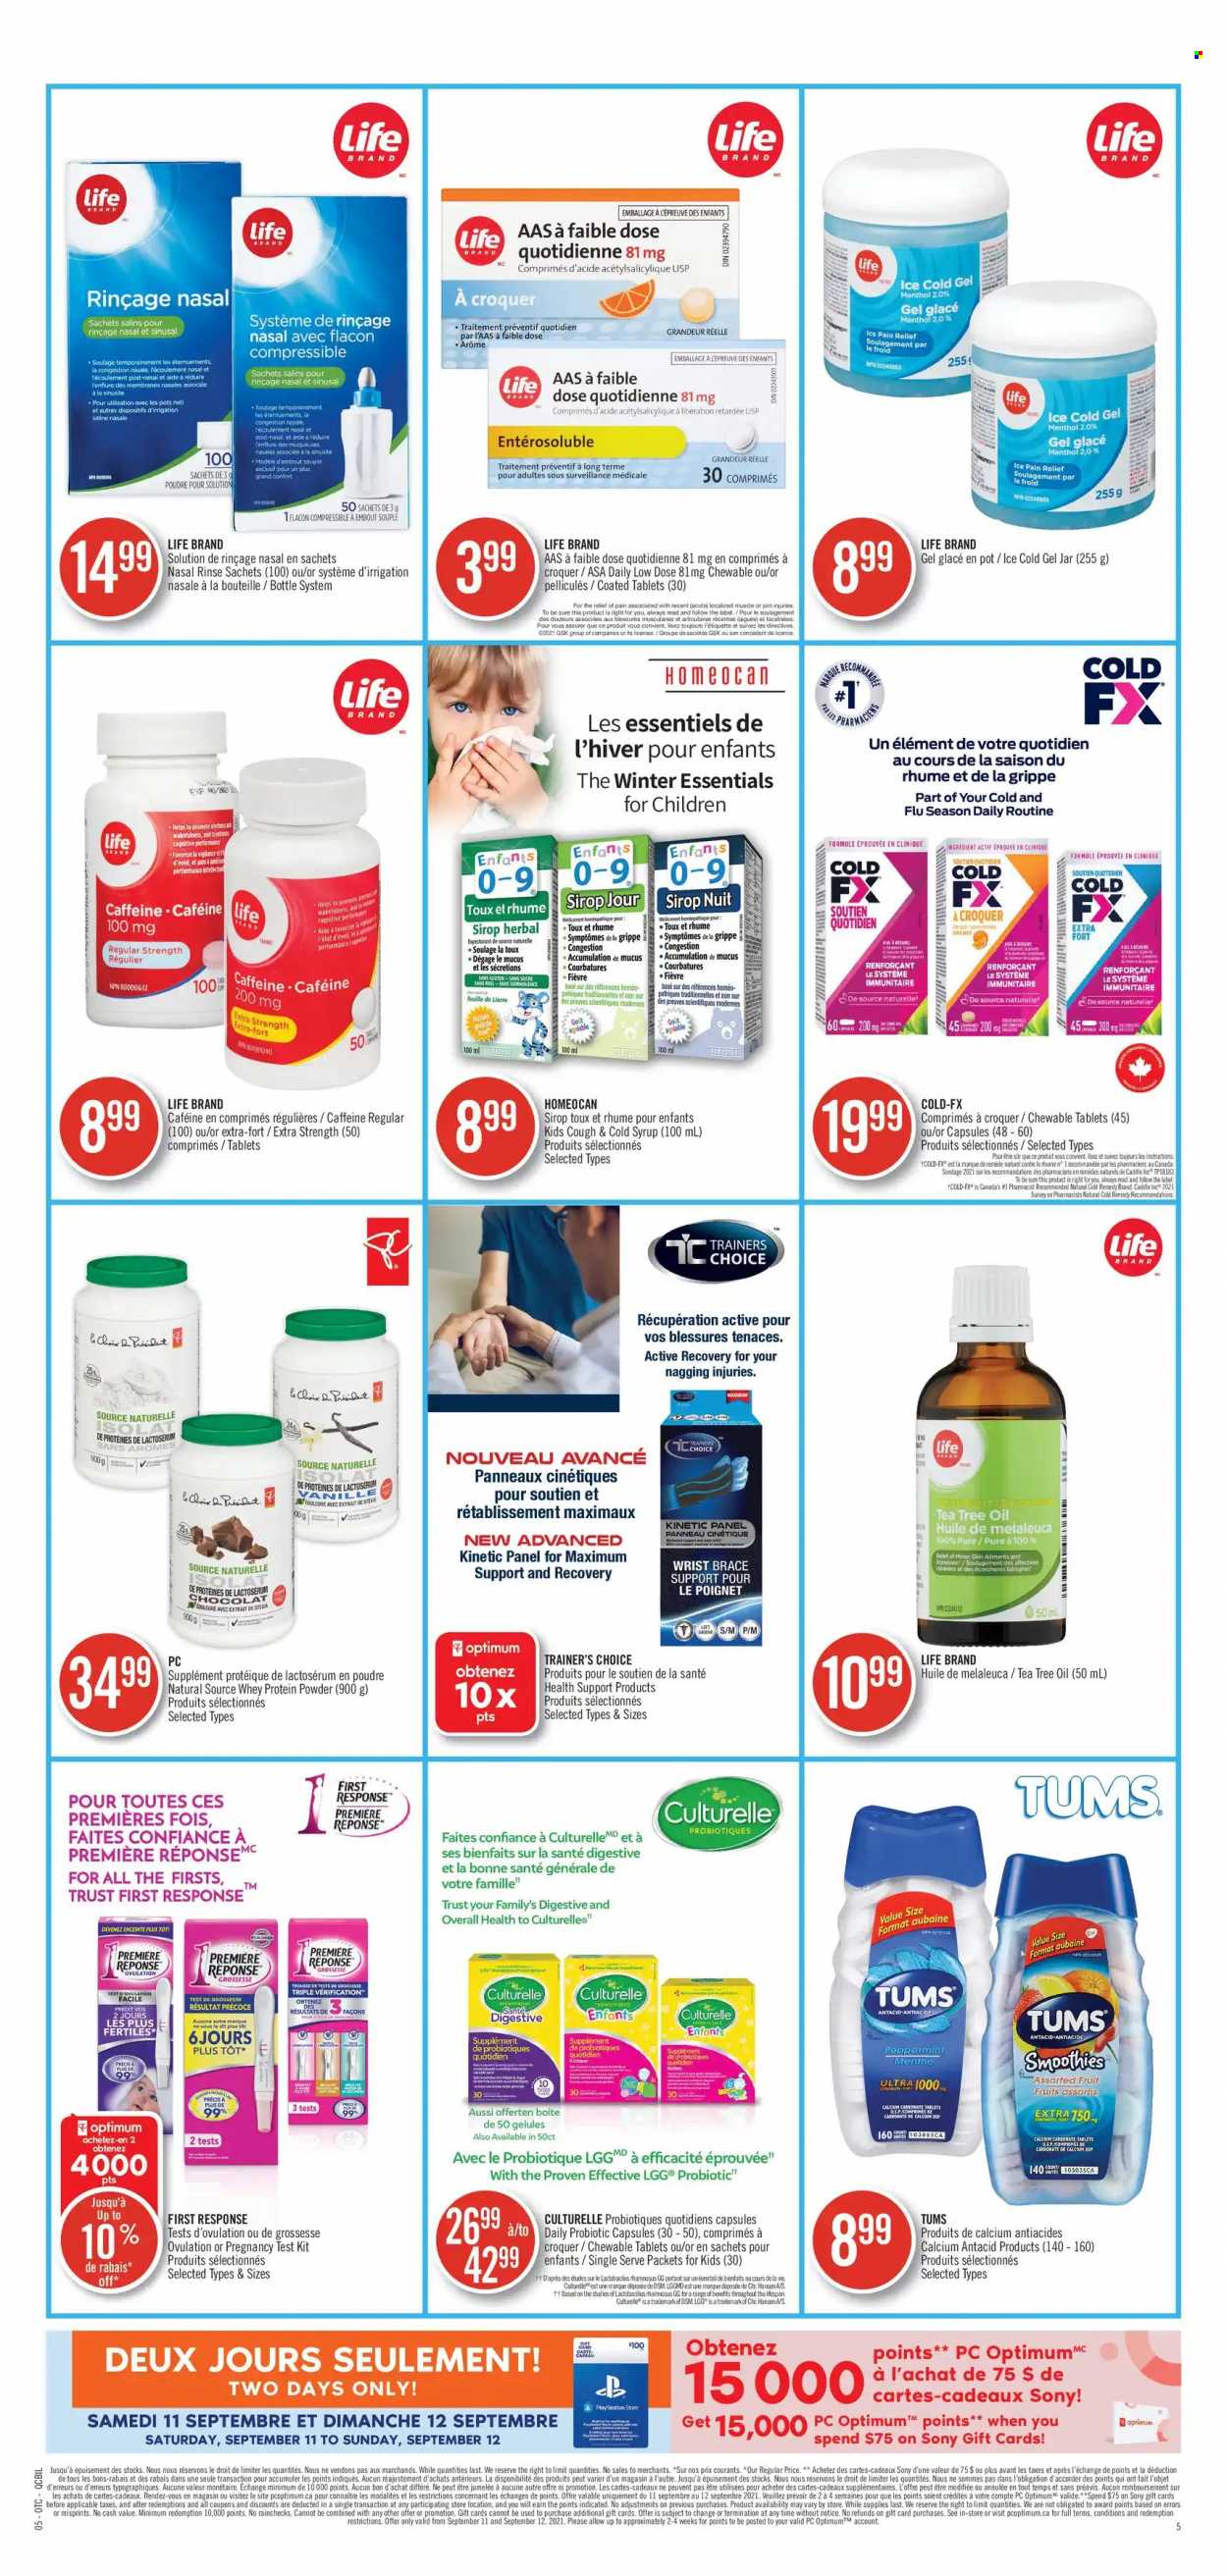 thumbnail - Pharmaprix Flyer - September 11, 2021 - September 16, 2021 - Sales products - Sony, oil, syrup, smoothie, tea, Clinique, Sure, pot, jar, PlayStation, pain relief, Culturelle, probiotics, whey protein, Antacid, tea tree oil, Low Dose, brace, calcium. Page 5.